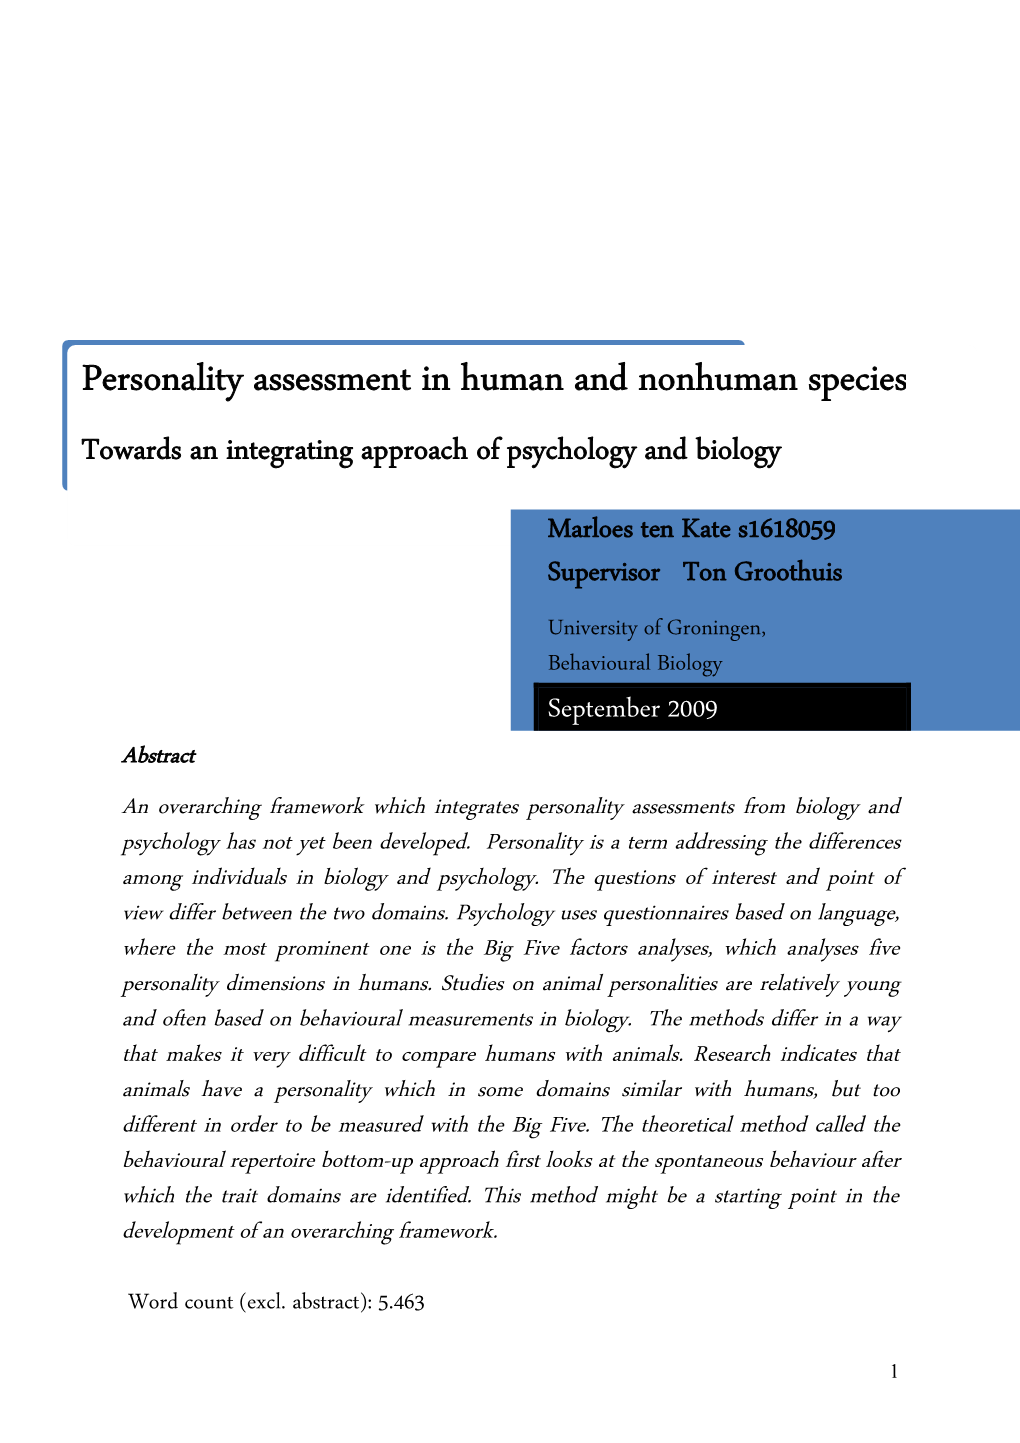 Personality Assessment in Human and Nonhuman Species